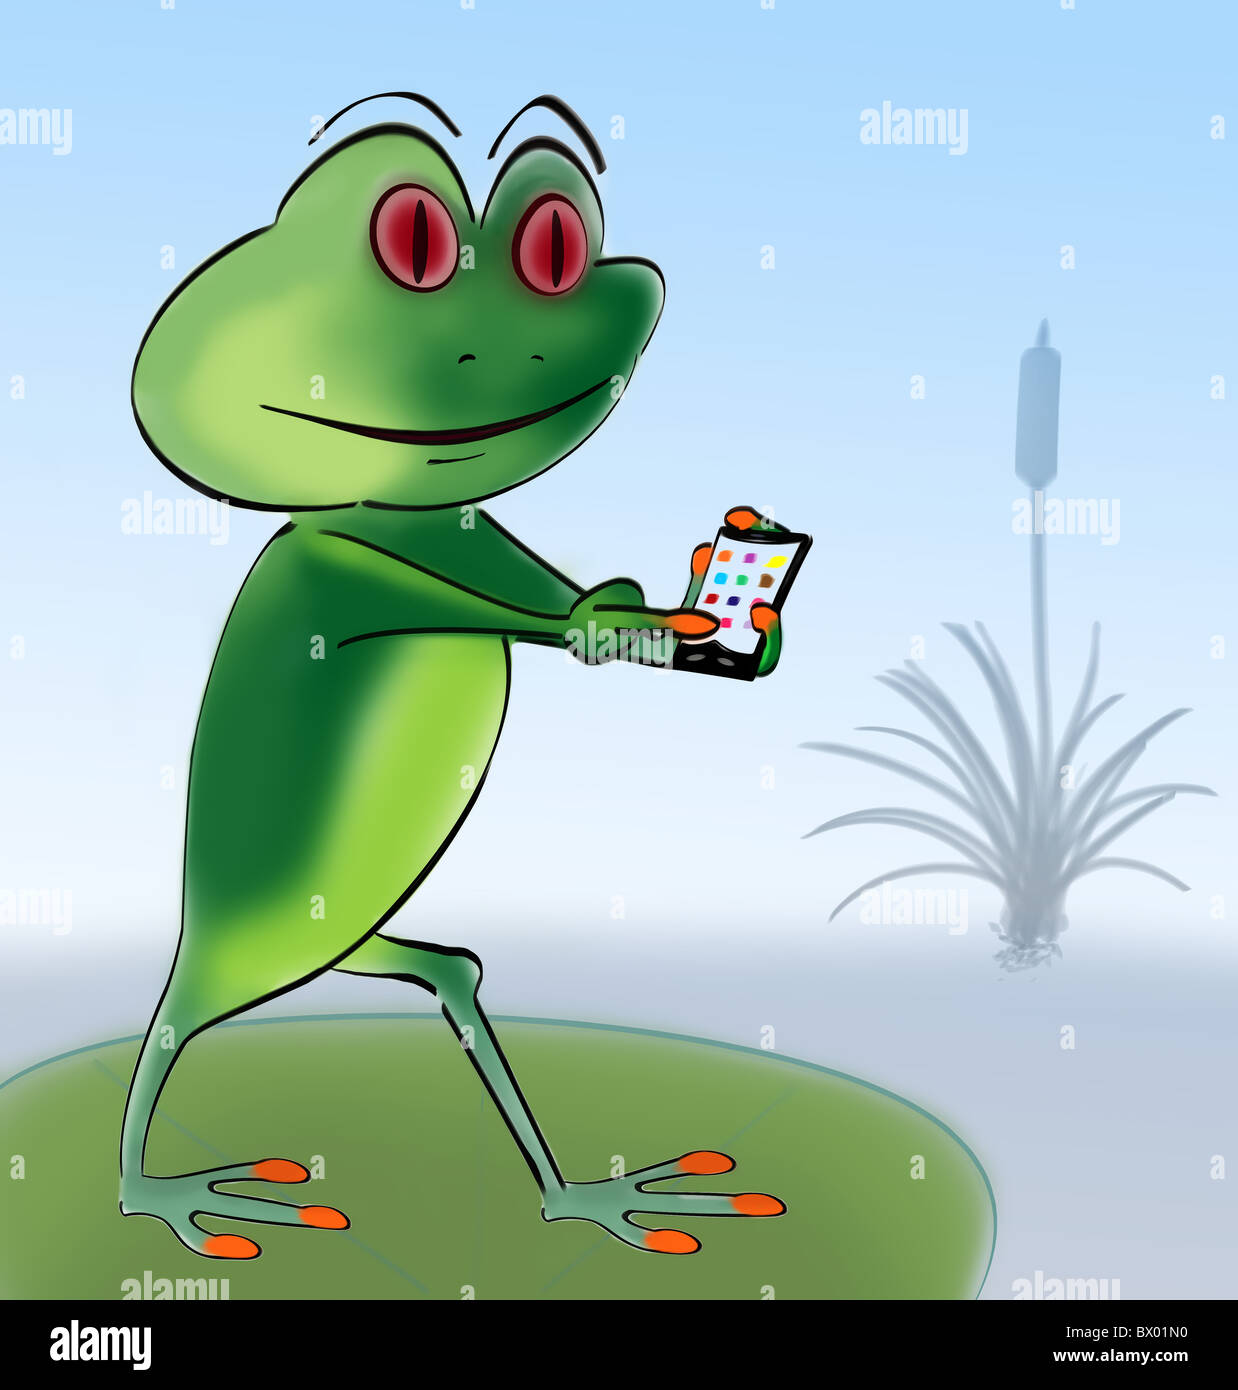 Cartoon image of a frog using a smart mobile phone. Stock Photo